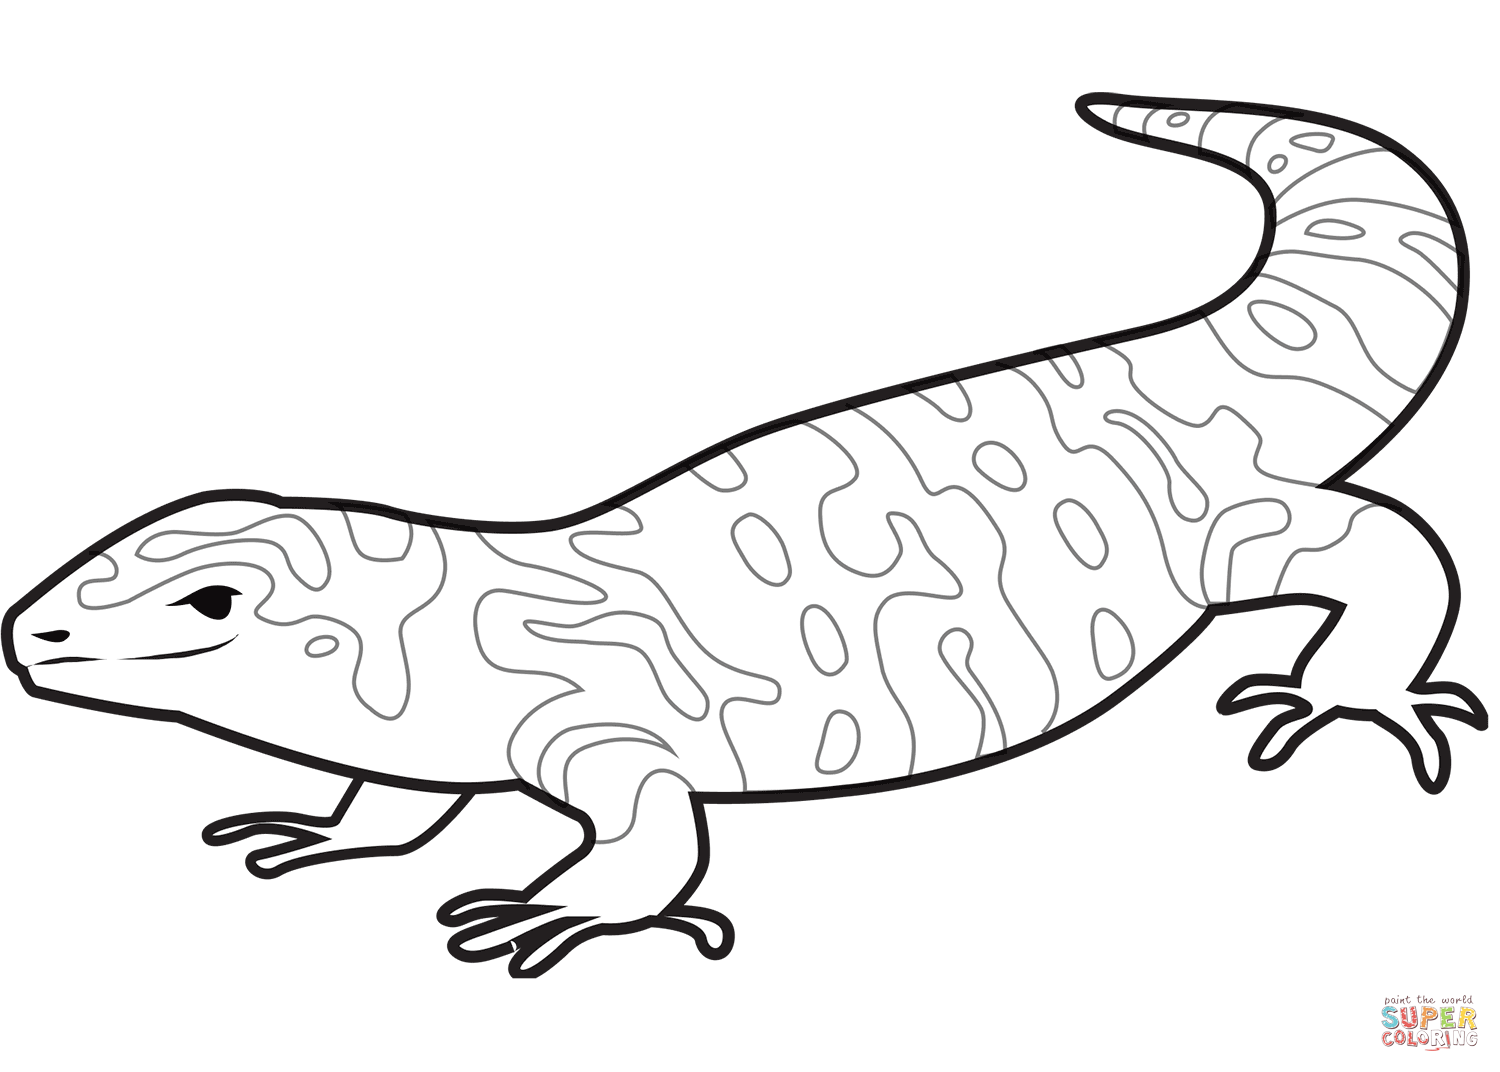 Gila monster coloring page free printable coloring pages